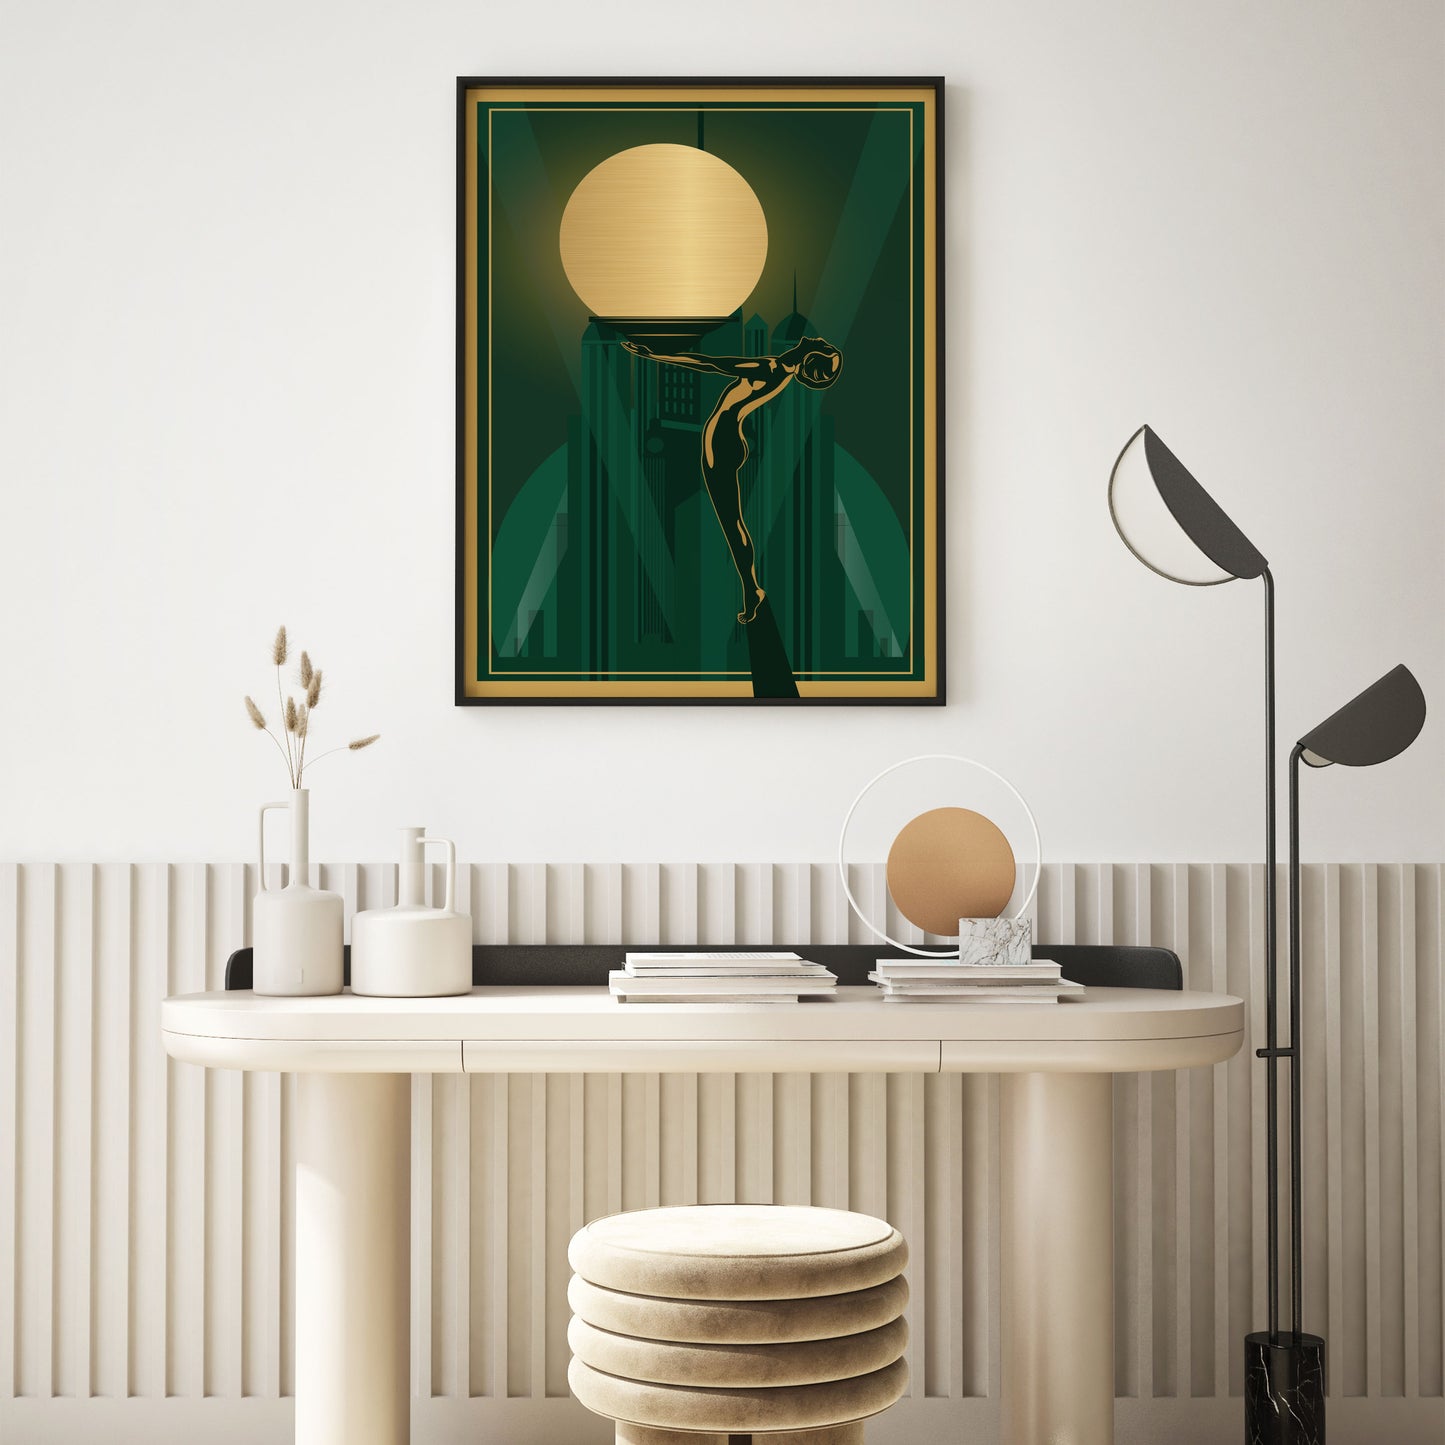 Green and gold art deco print